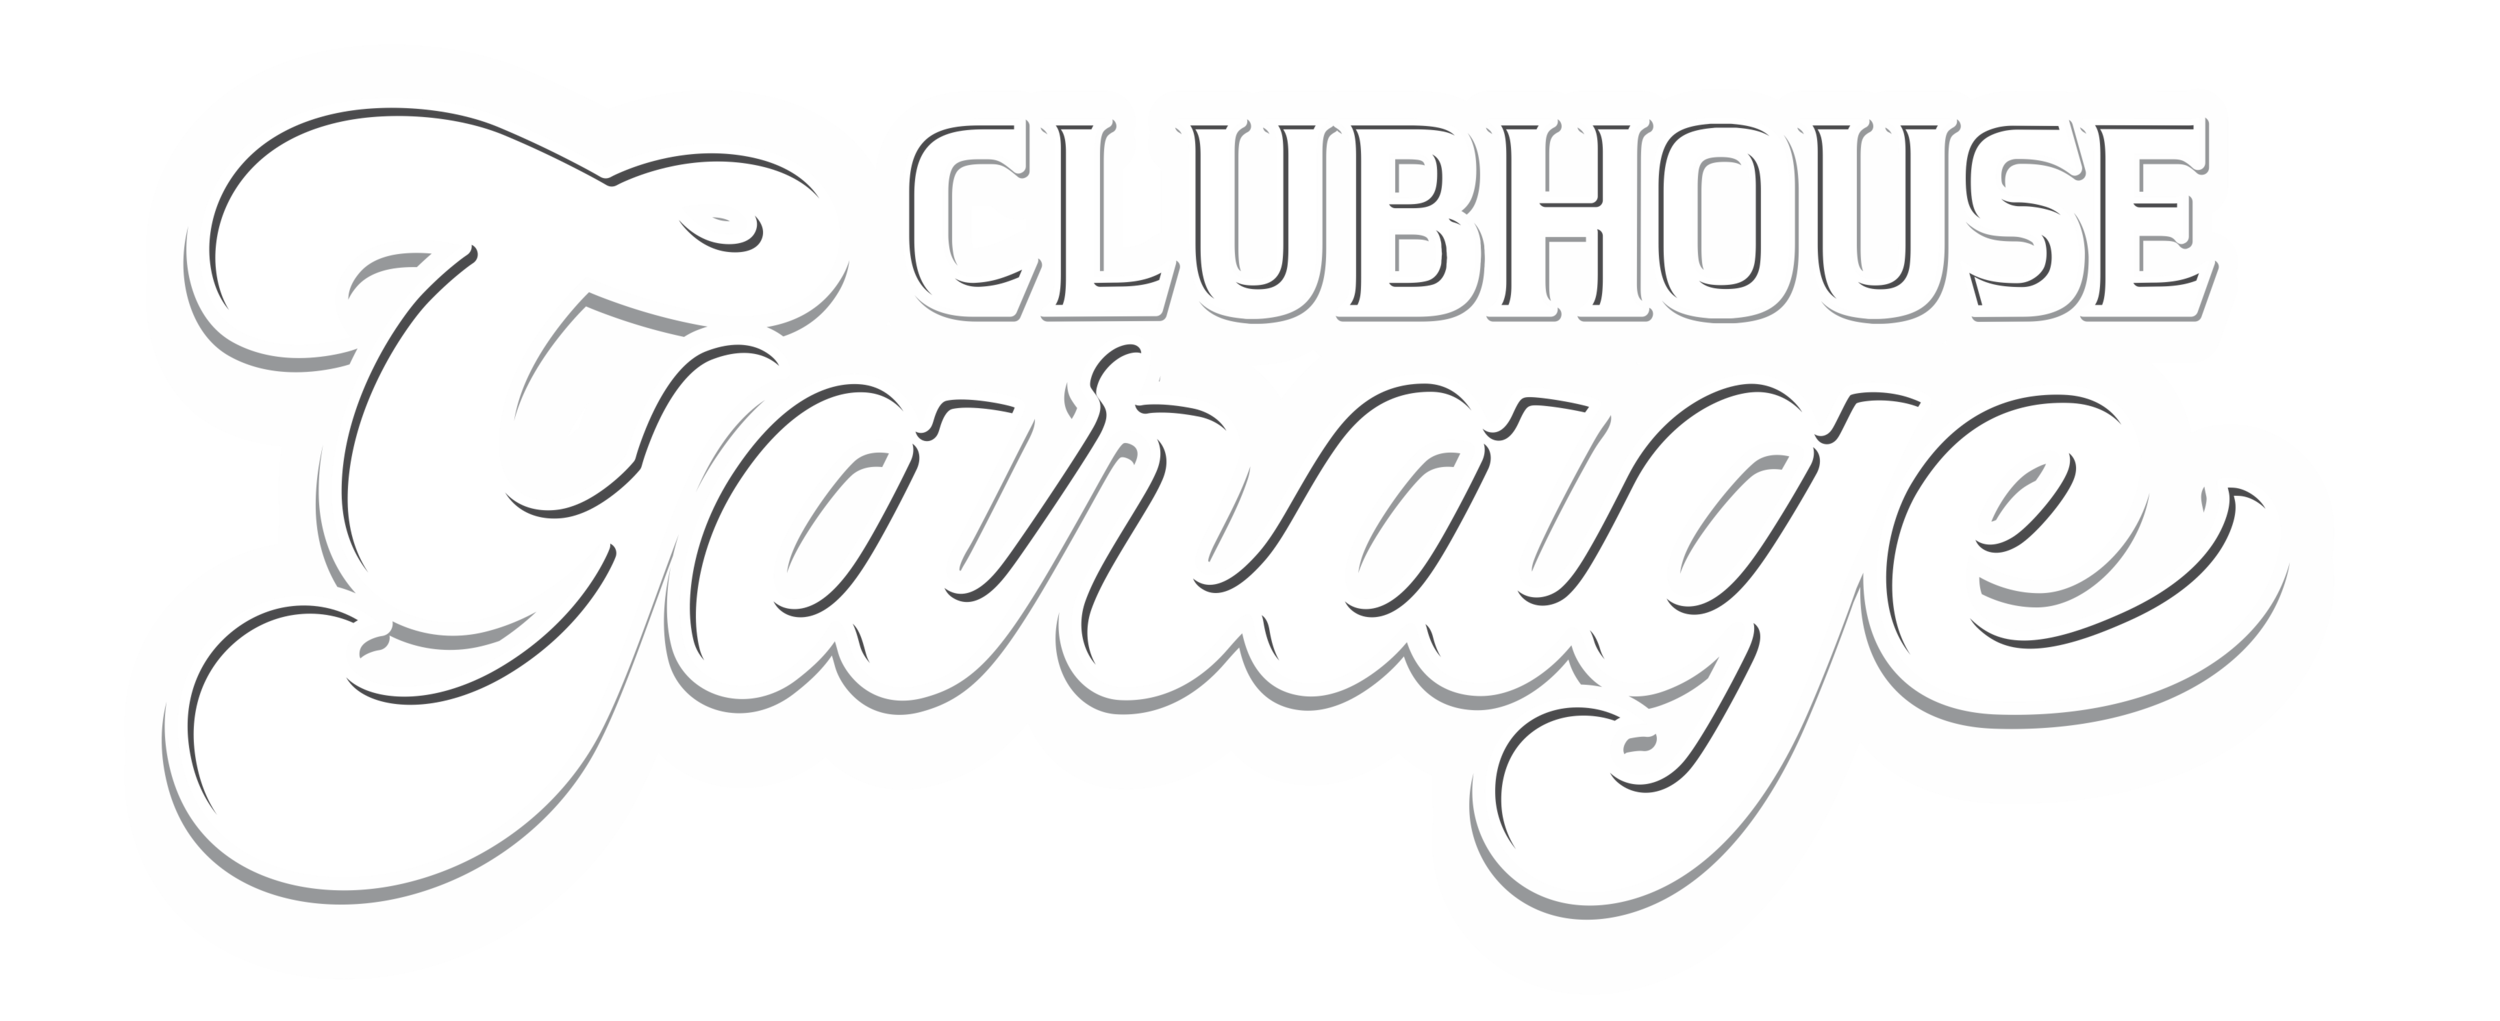 Clubhouse garage white text